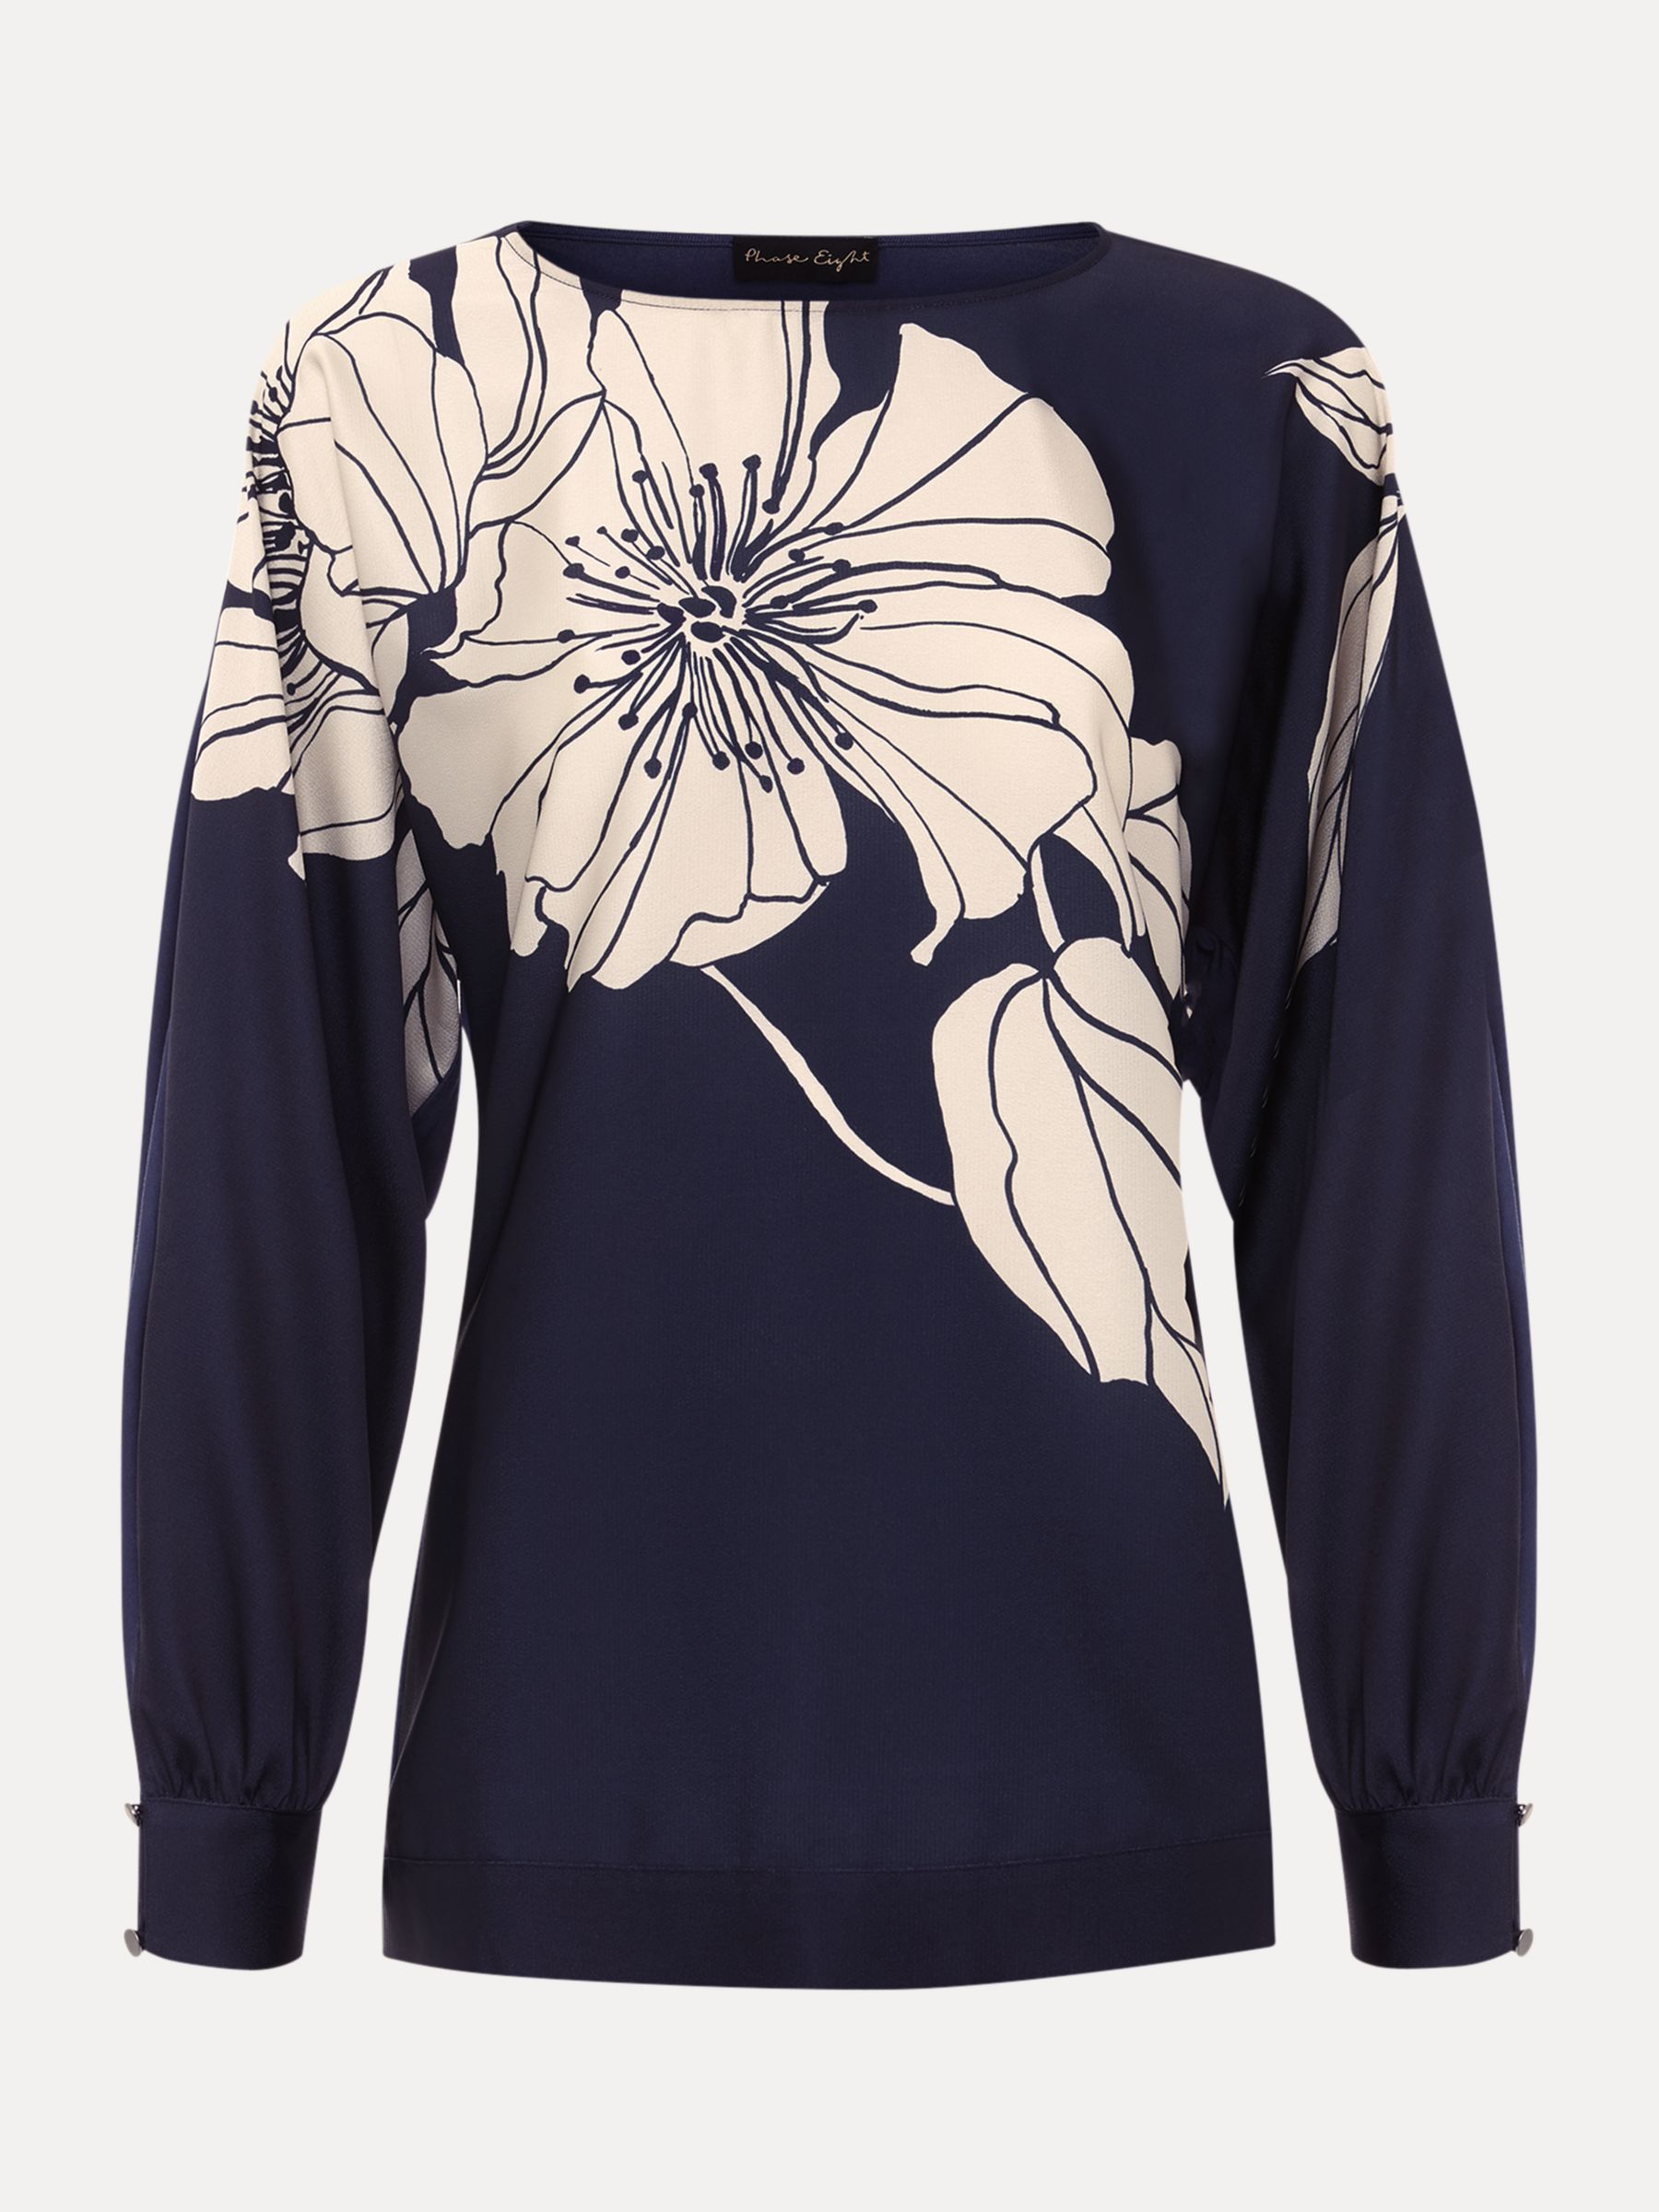 Lildy Women's Printed Super Soft Hoodie, S-M, Abstract Floral at